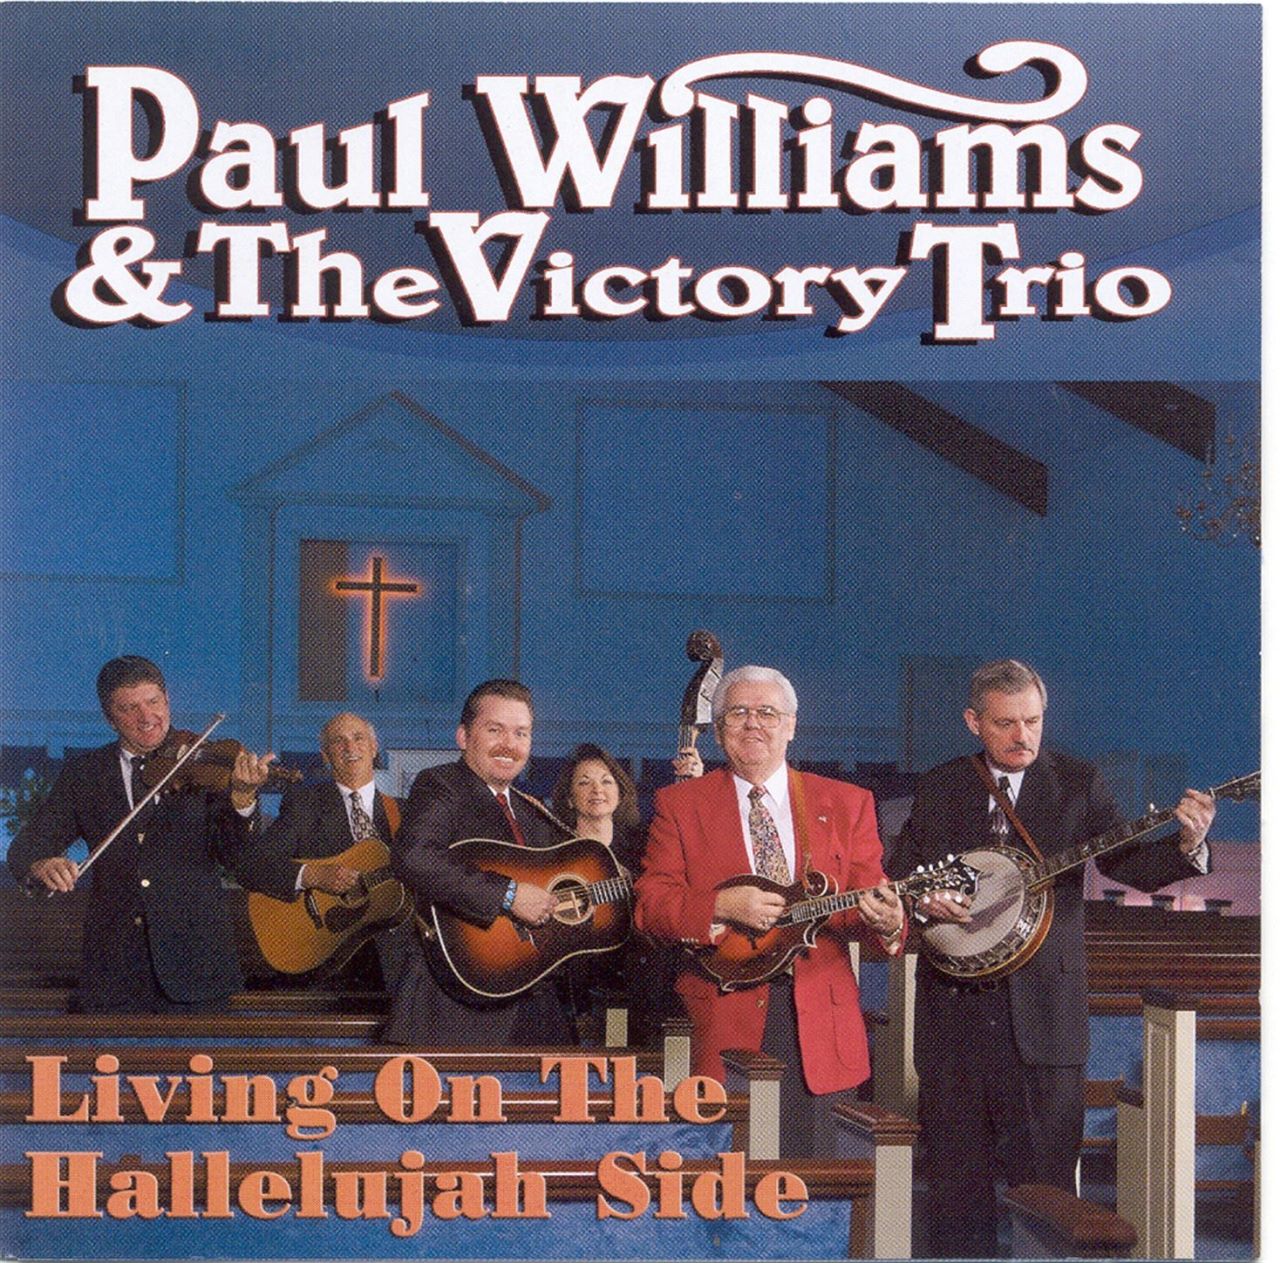 Paul Williams & The Victory Trio - Living On The Hallelujah Side cover album